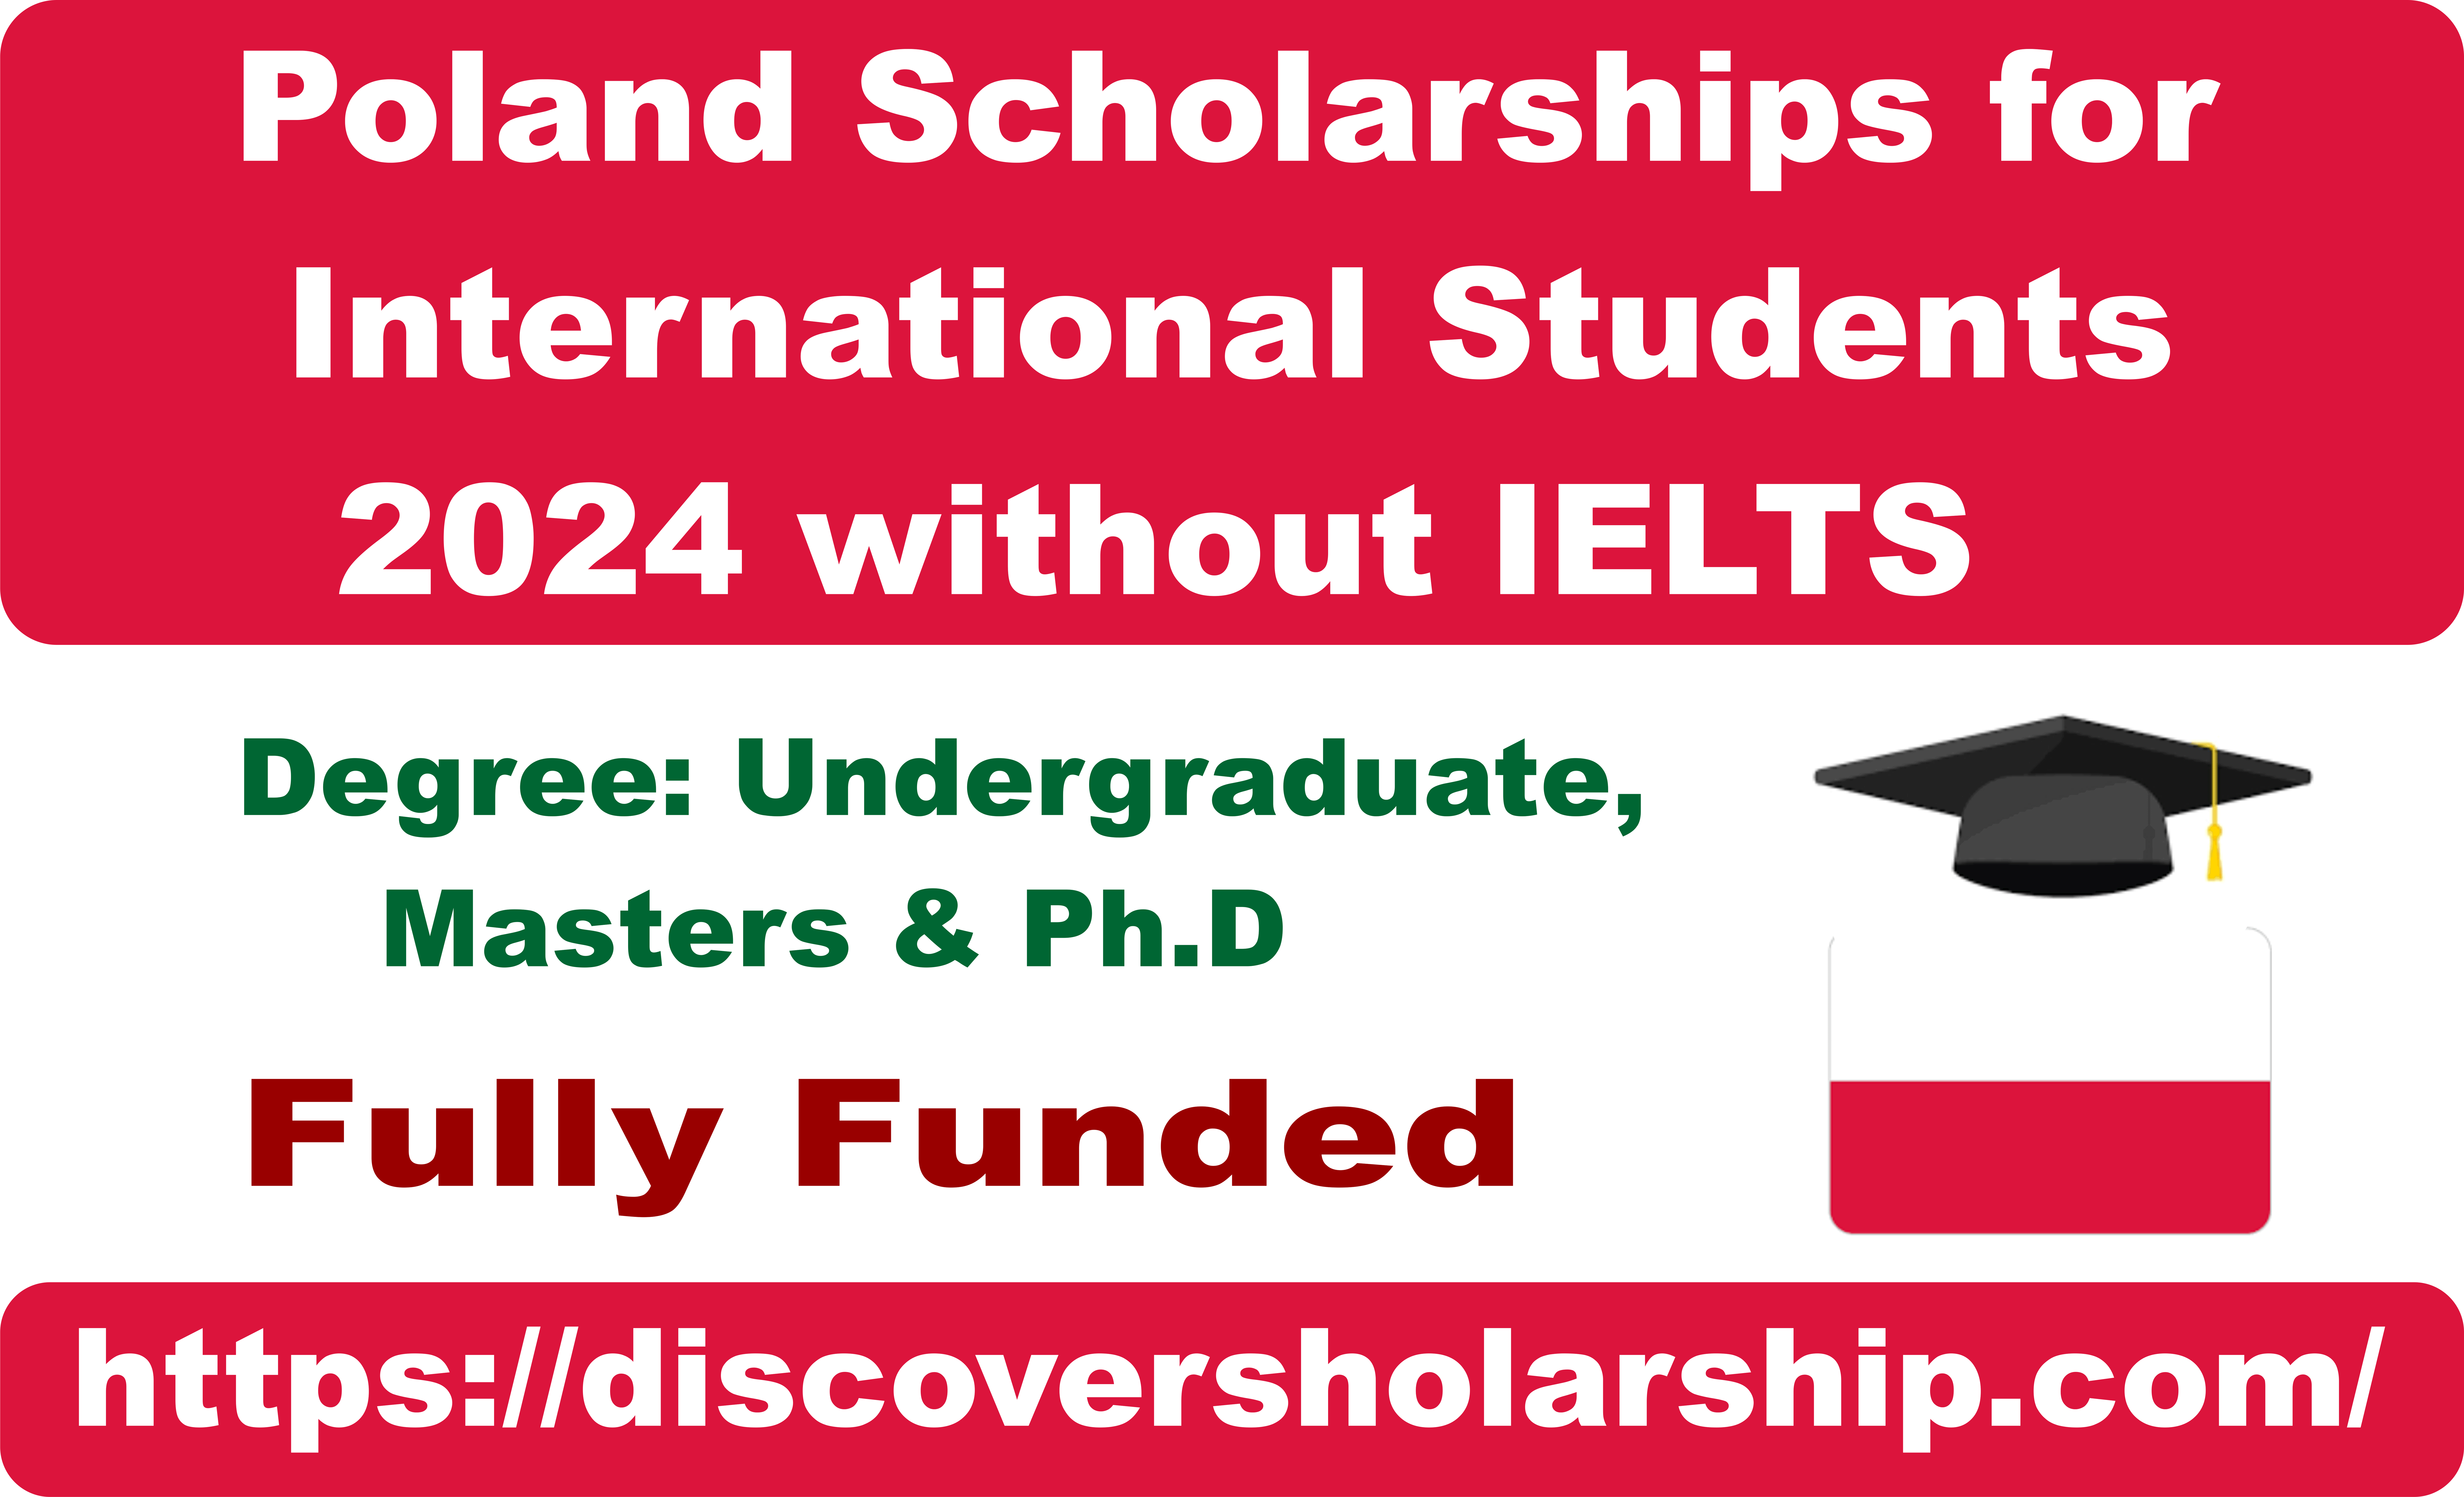 Poland Scholarships without IELTS for International Students 2024